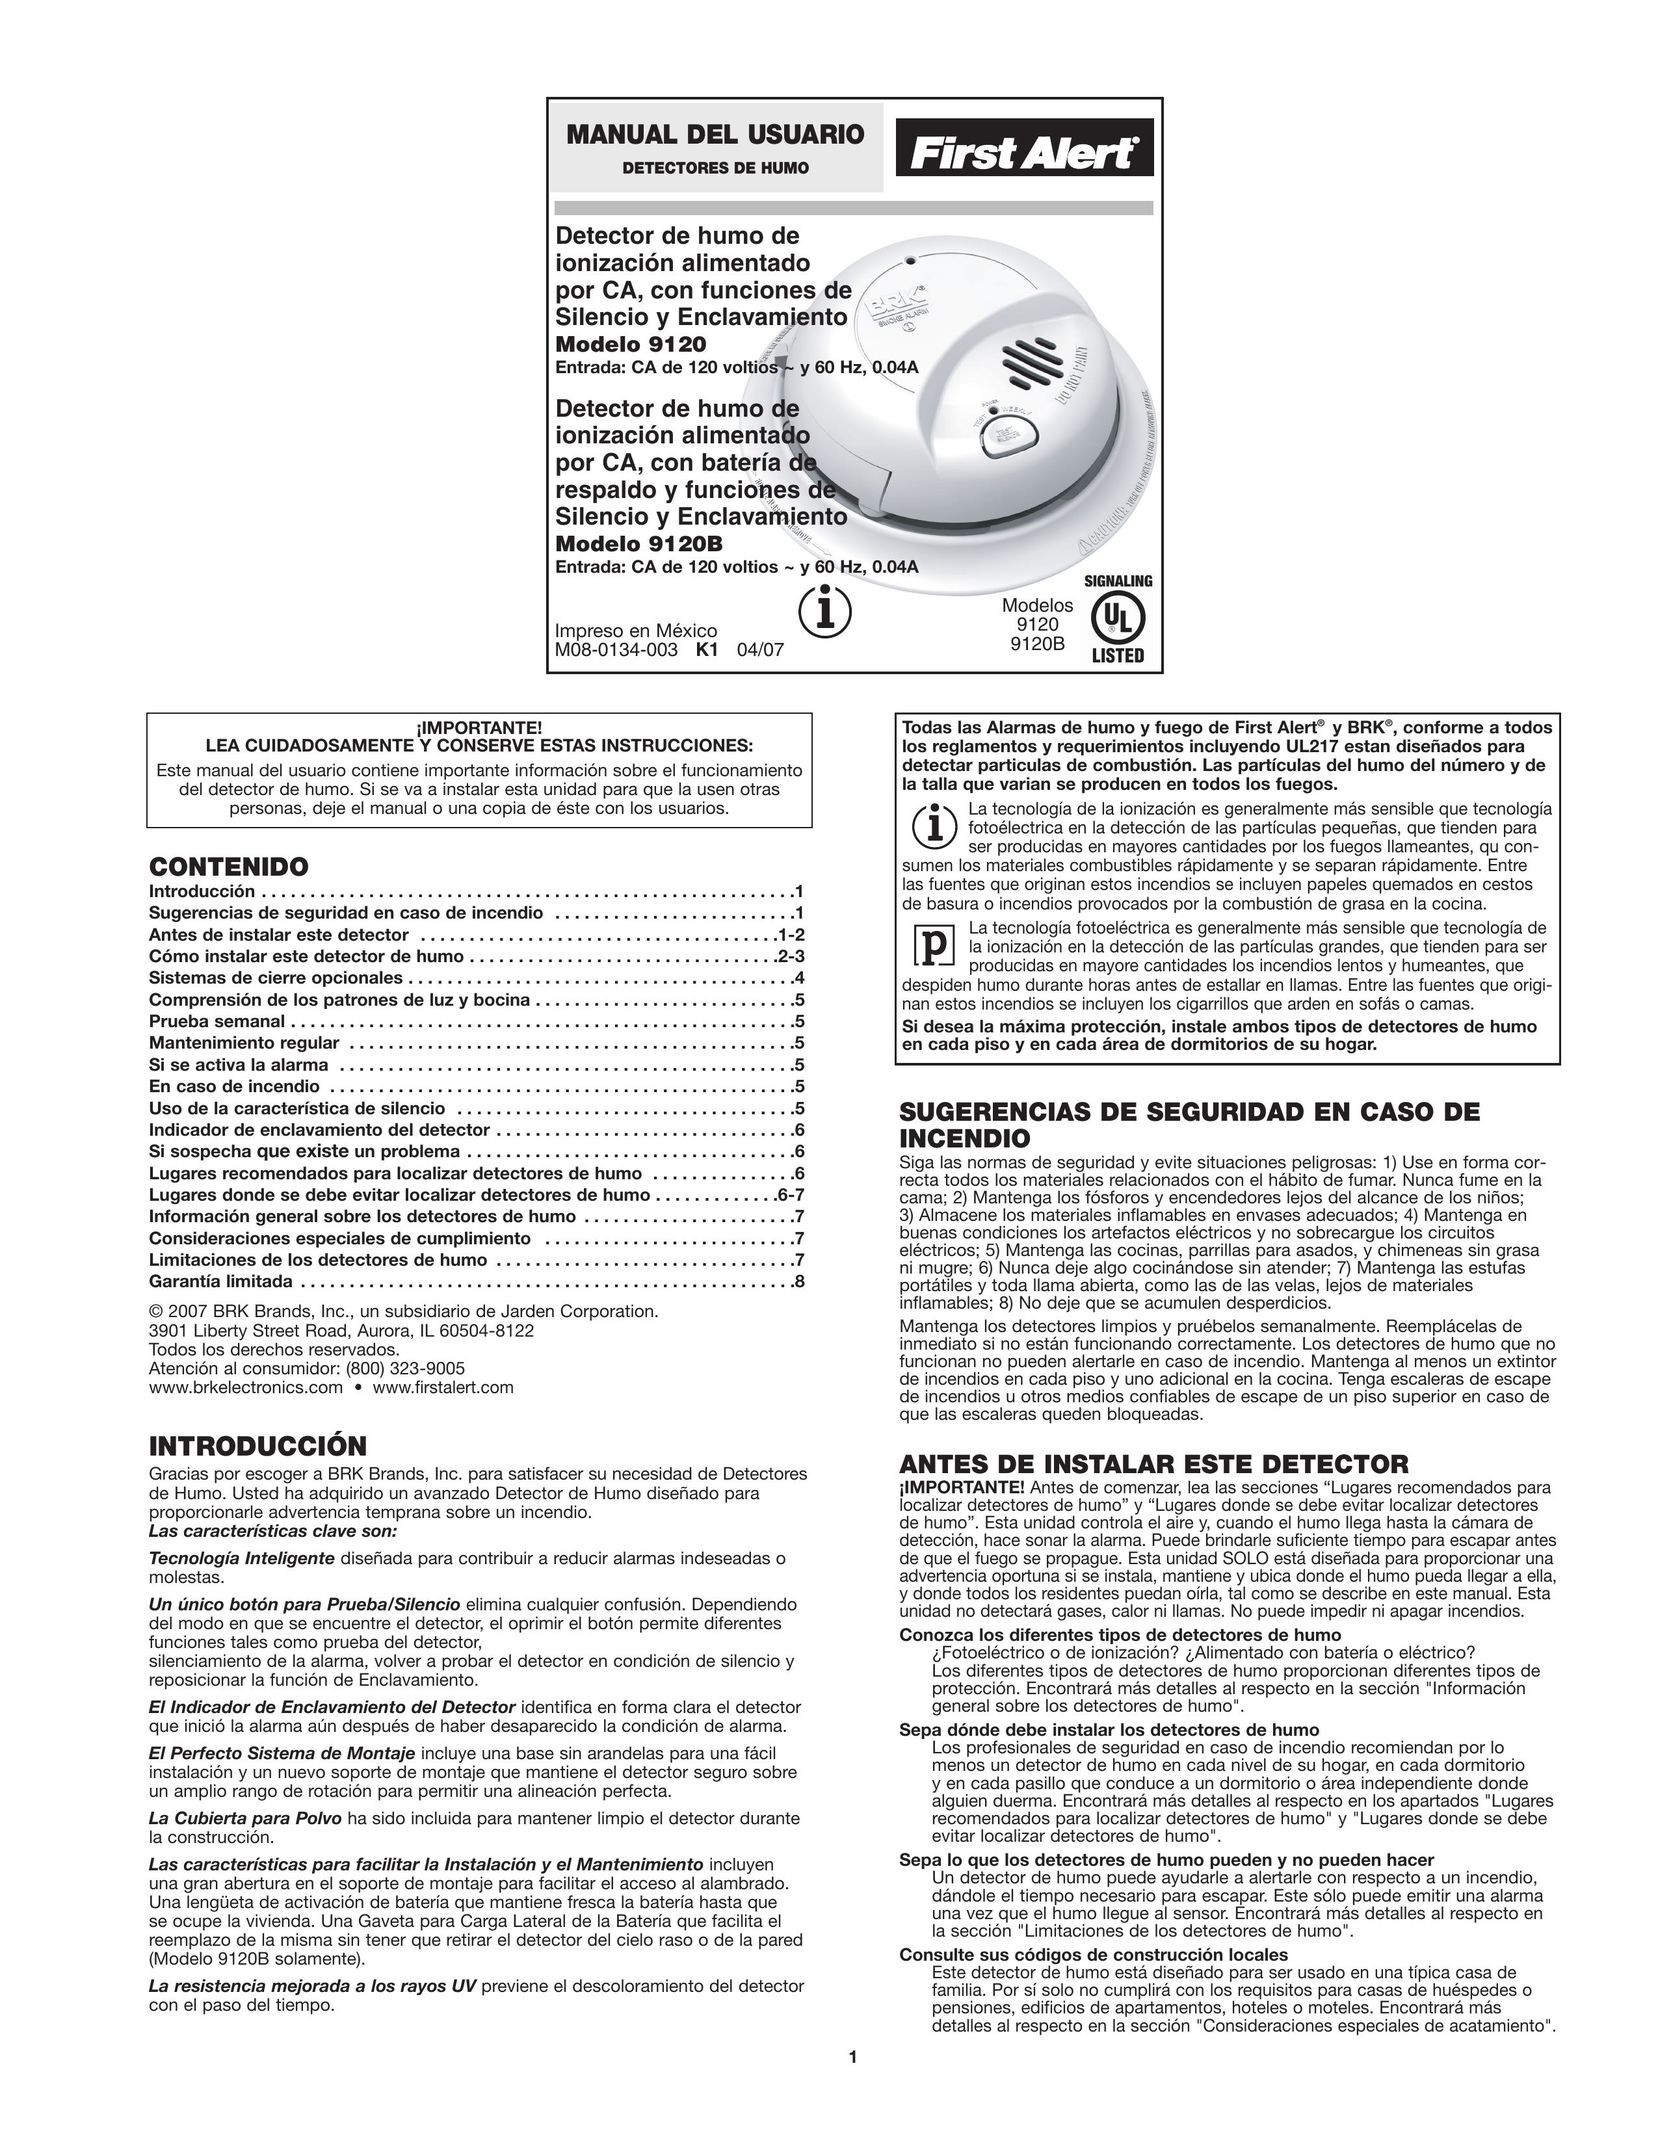 First Alert 9120 All in One Printer User Manual